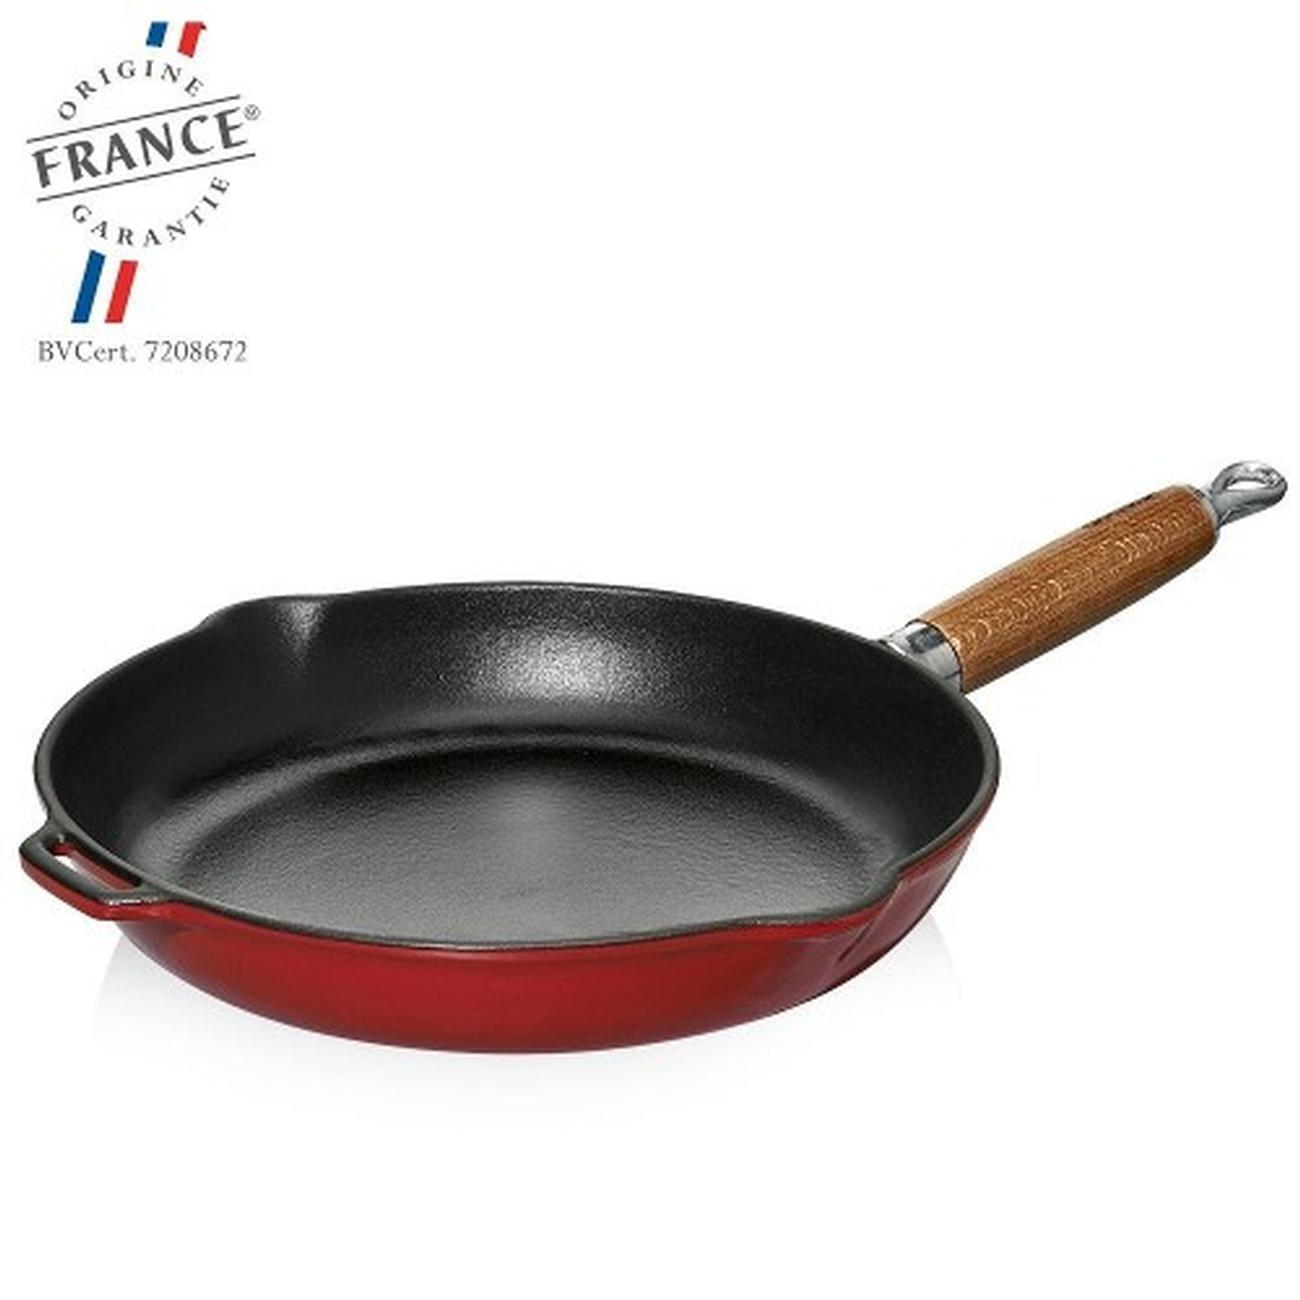 https://www.thekitchenwhisk.ie/contentFiles/productImages/Large/chasseur-frying-pan-28cm-redblack.jpg